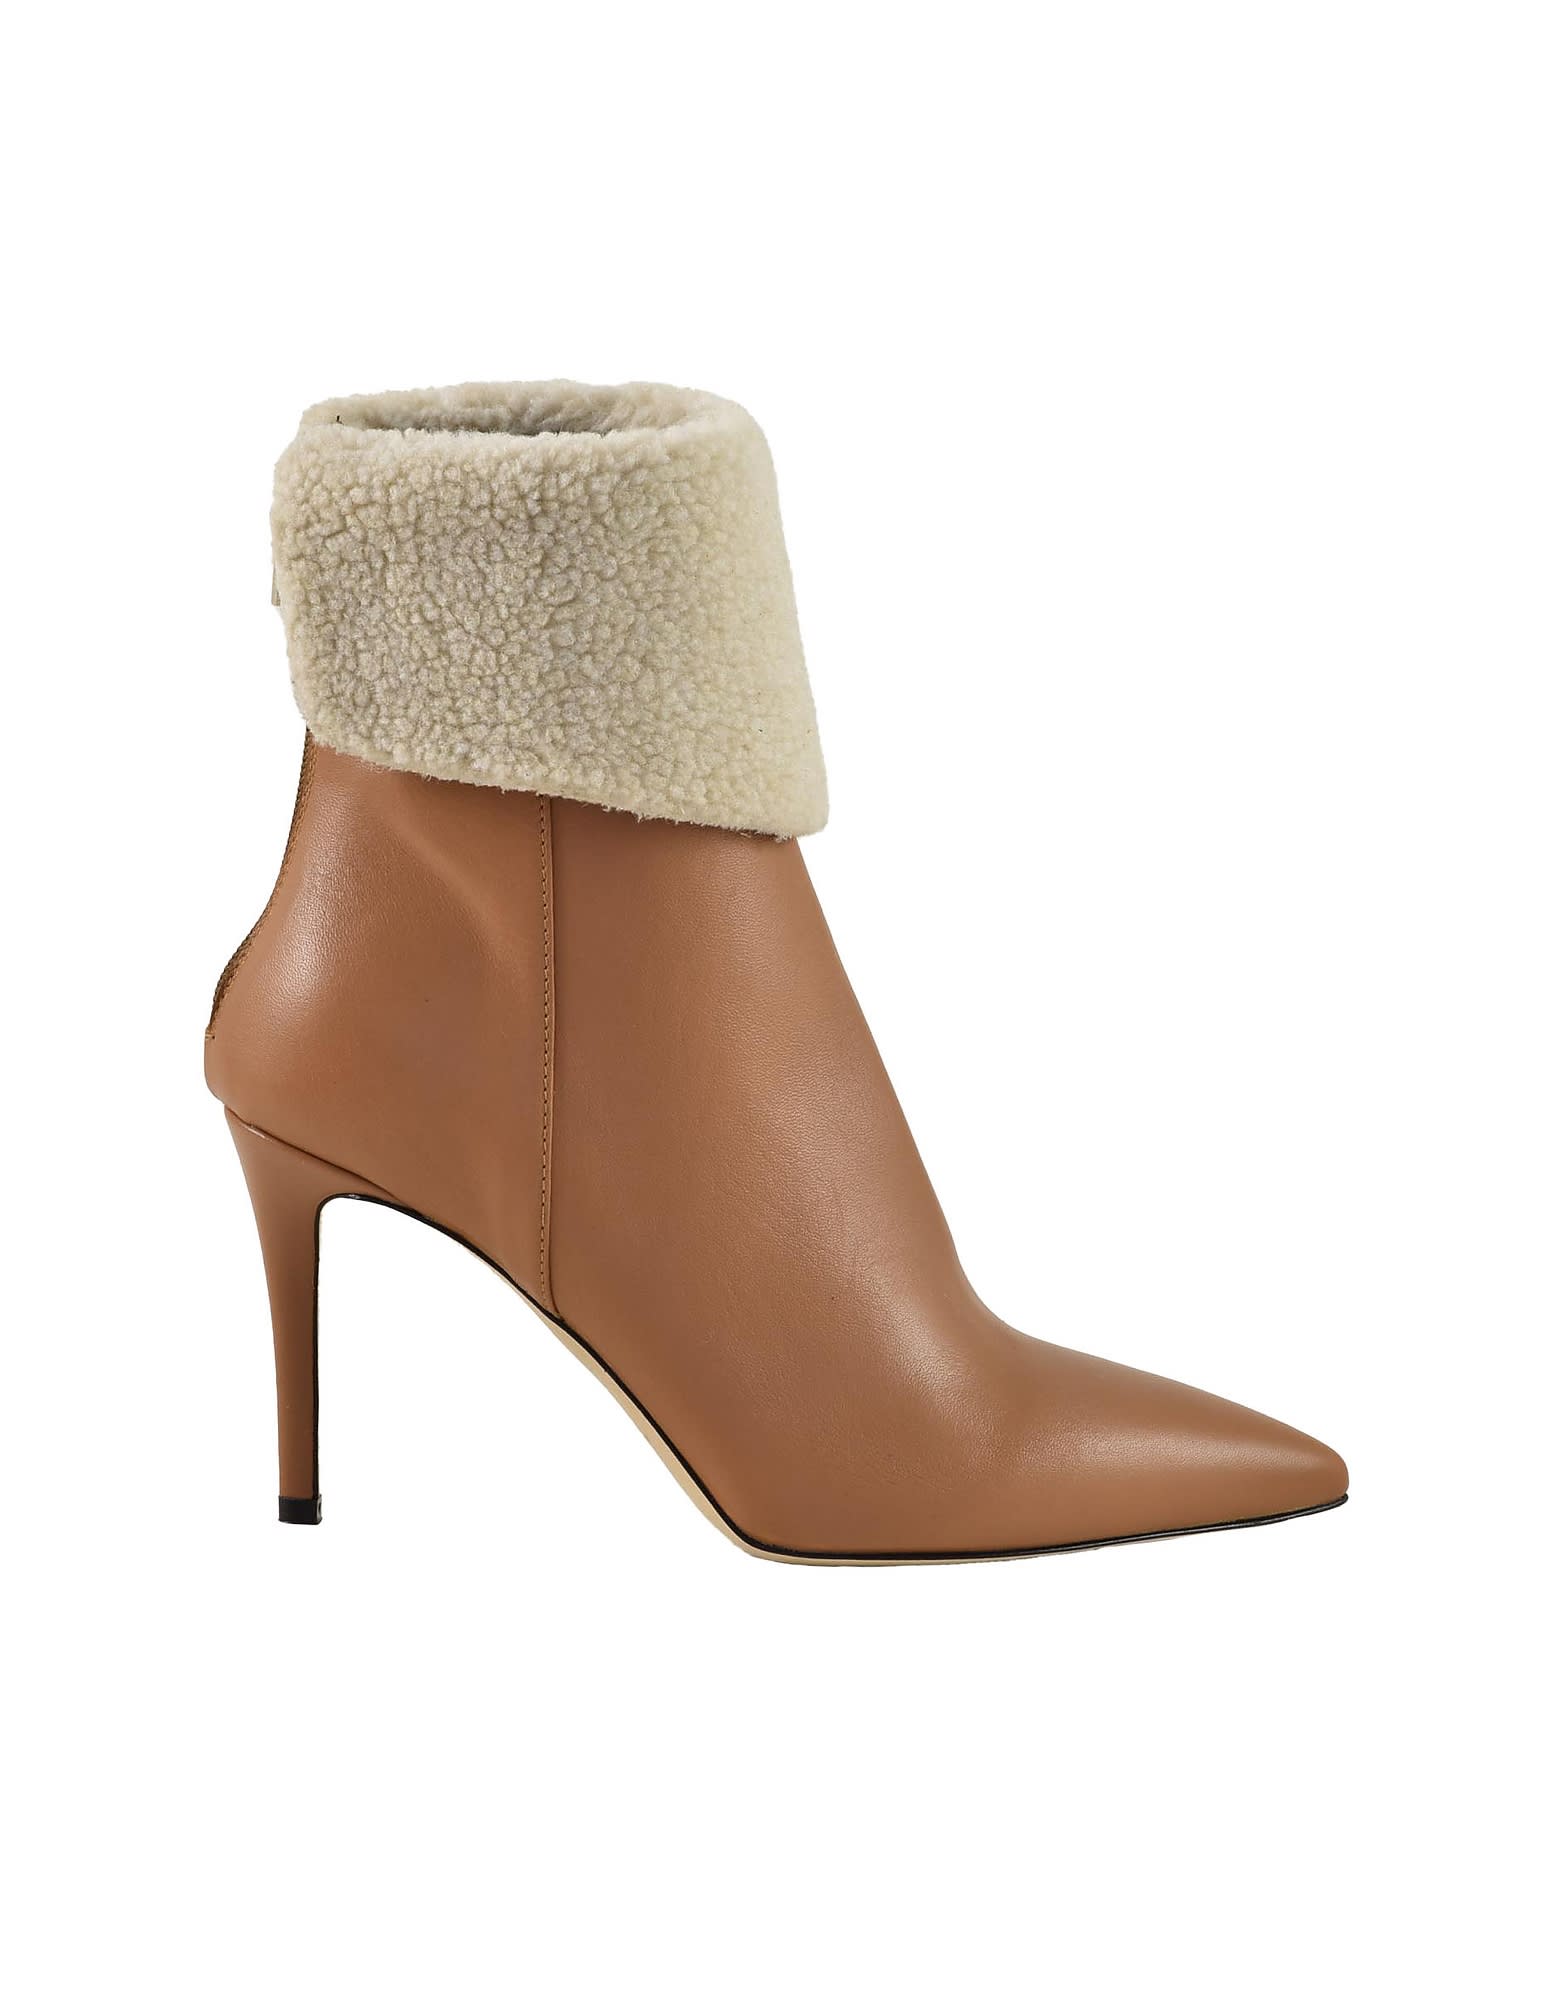 Manila Grace Womens Leather Booties